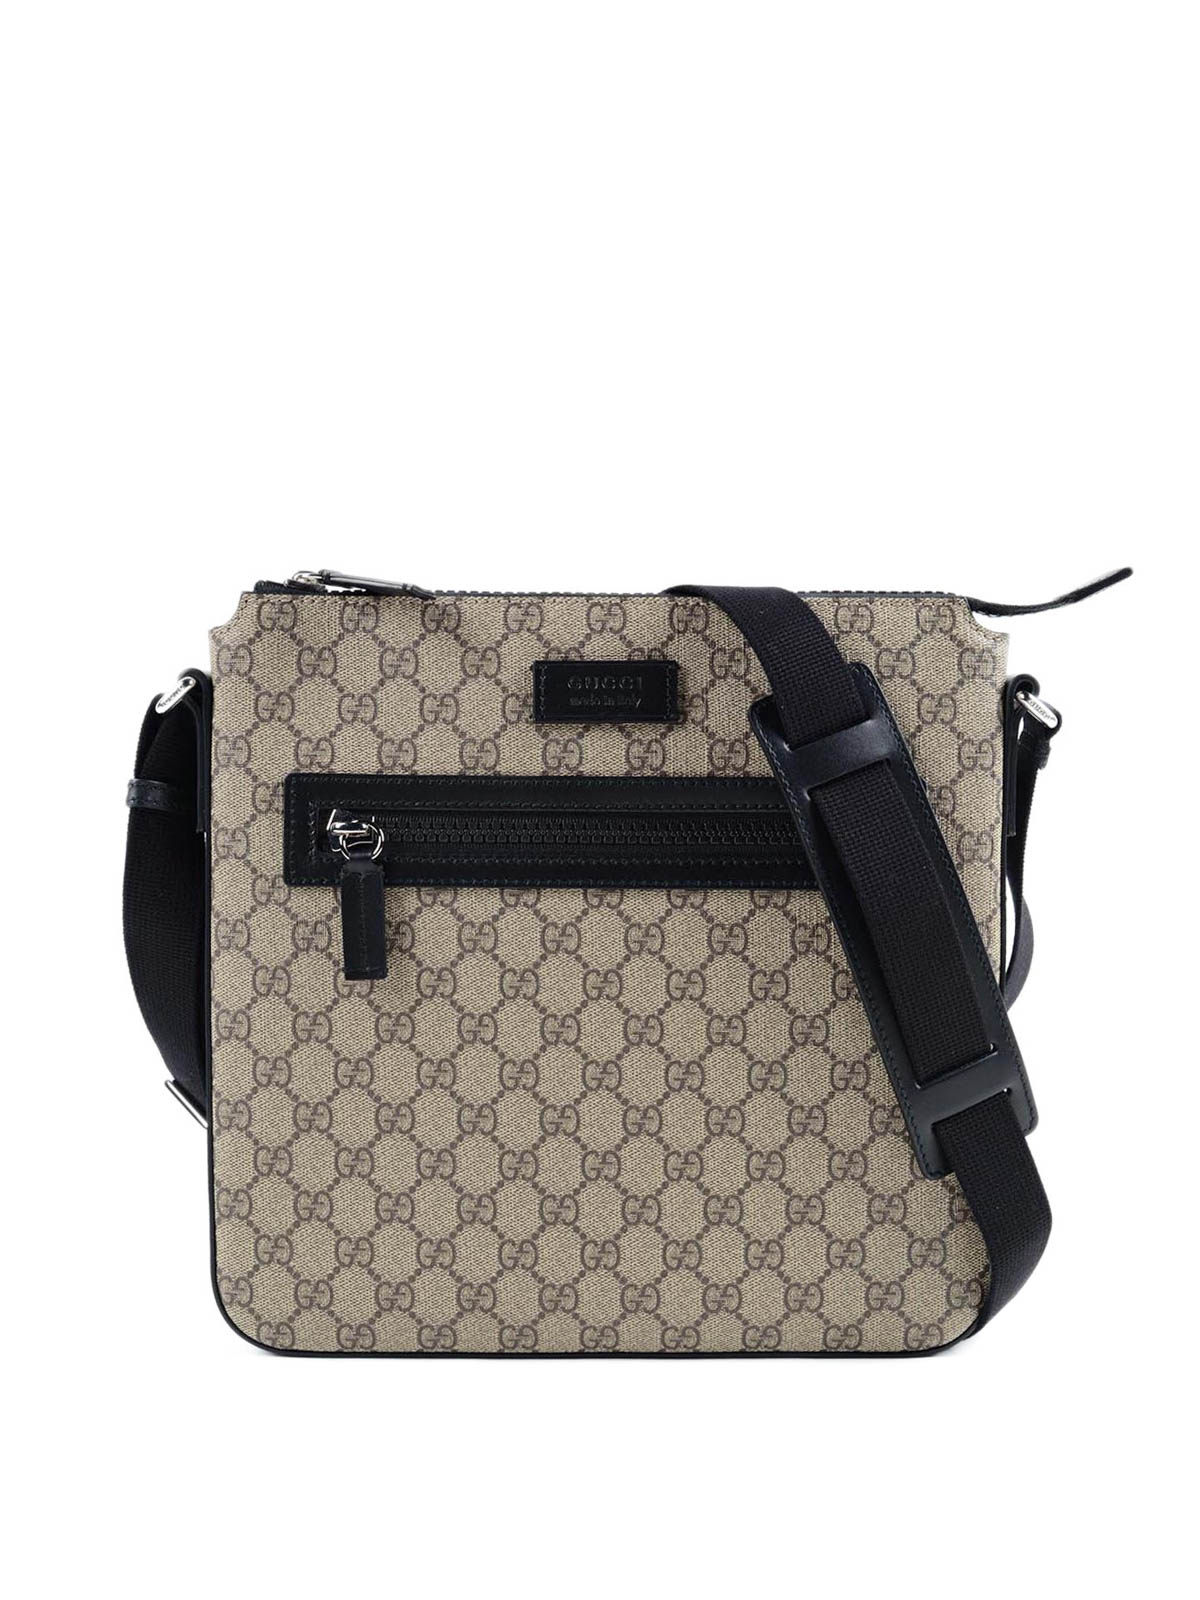 GG Supreme crossbody by Gucci - cross body bags | Shop online at www.neverfullmm.com